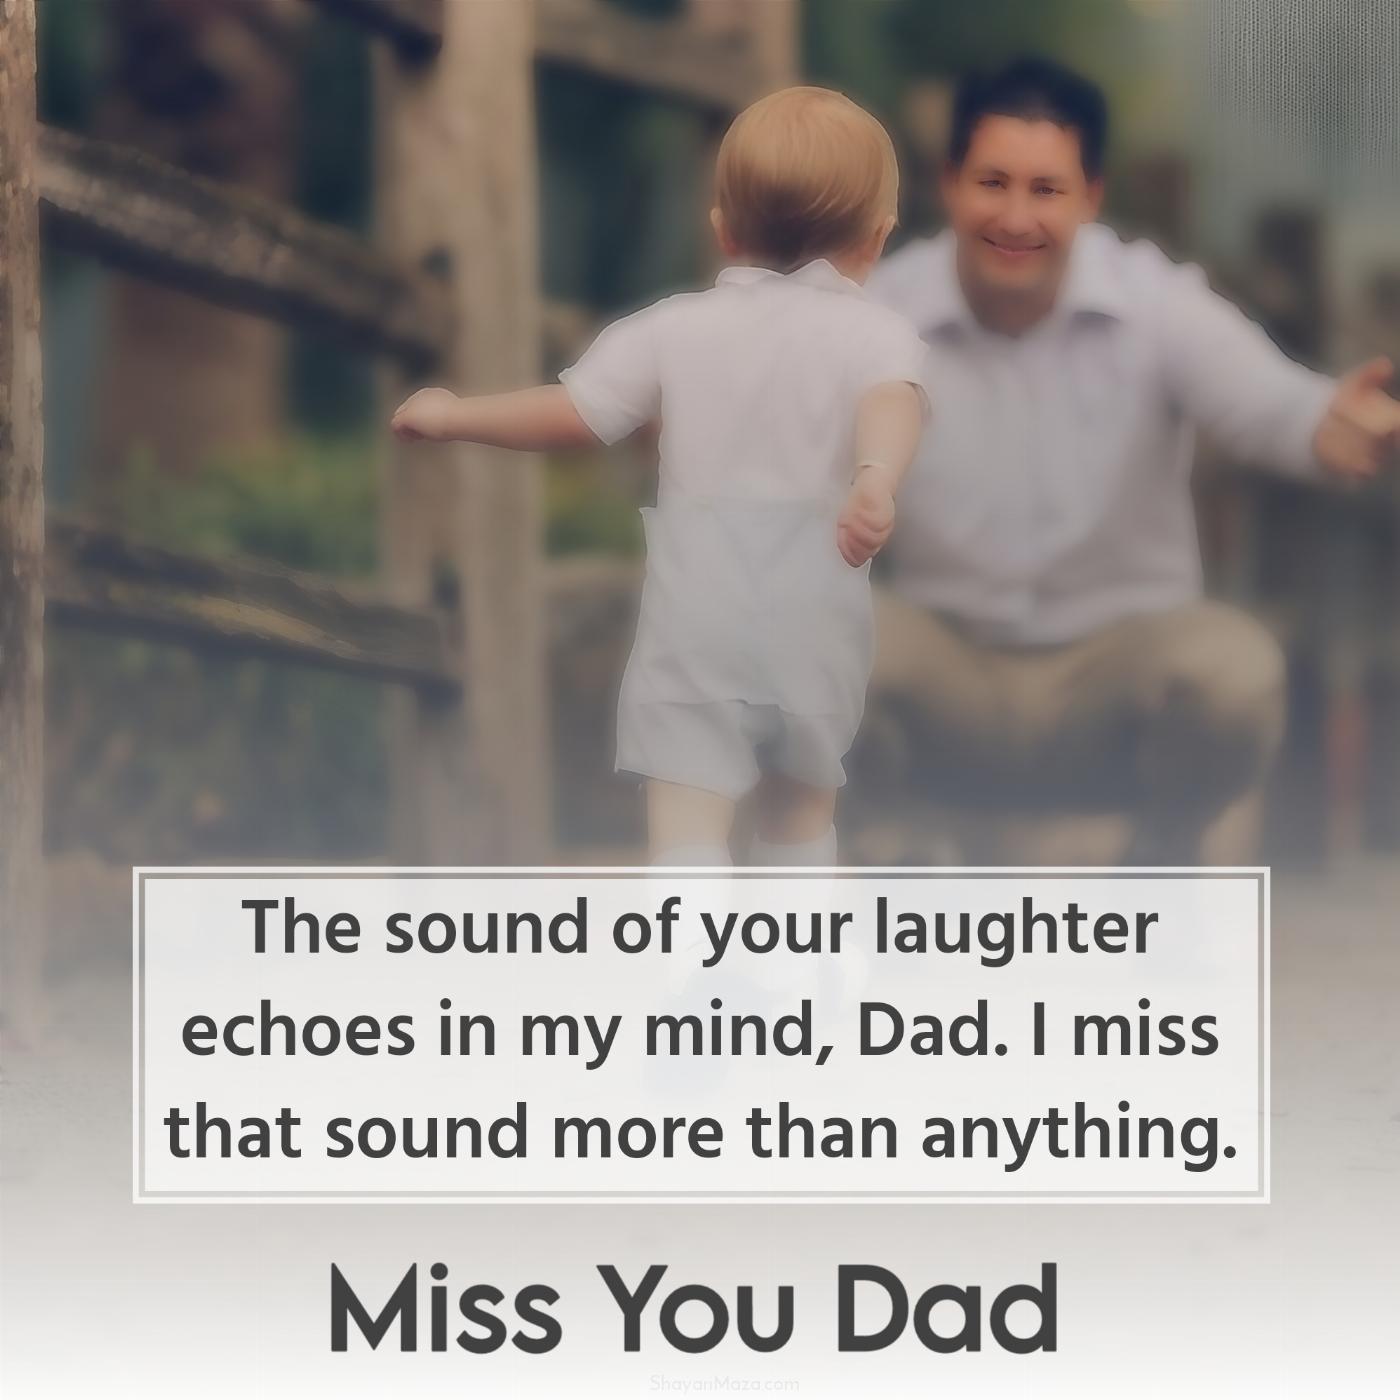 The sound of your laughter echoes in my mind Dad